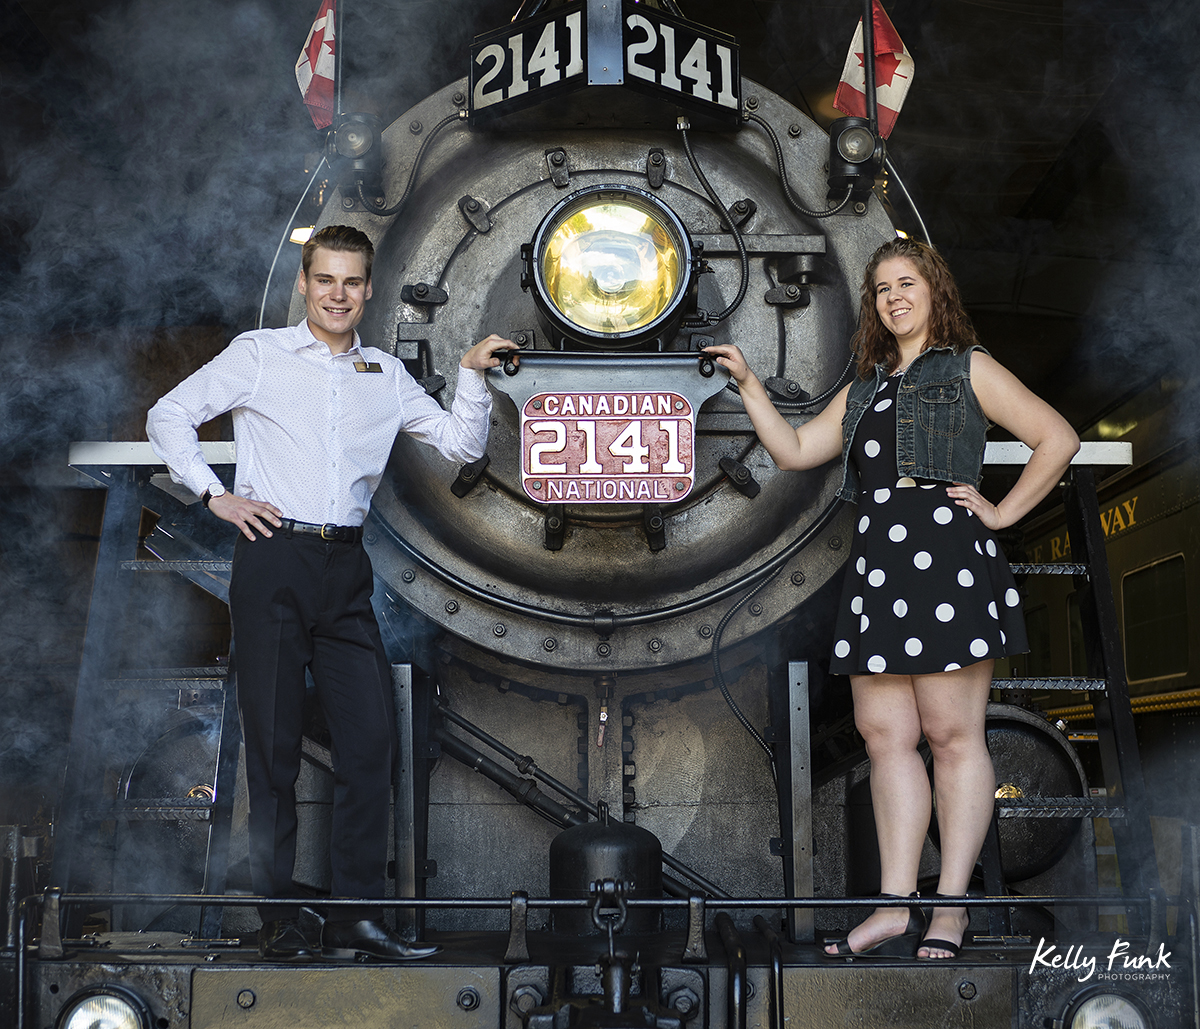 employees of the Kamloops Heritage railway pose during shooting for the 2019 Kamloops fire fighters calendar, Thompson Okanagan region, British Columbia, Canada